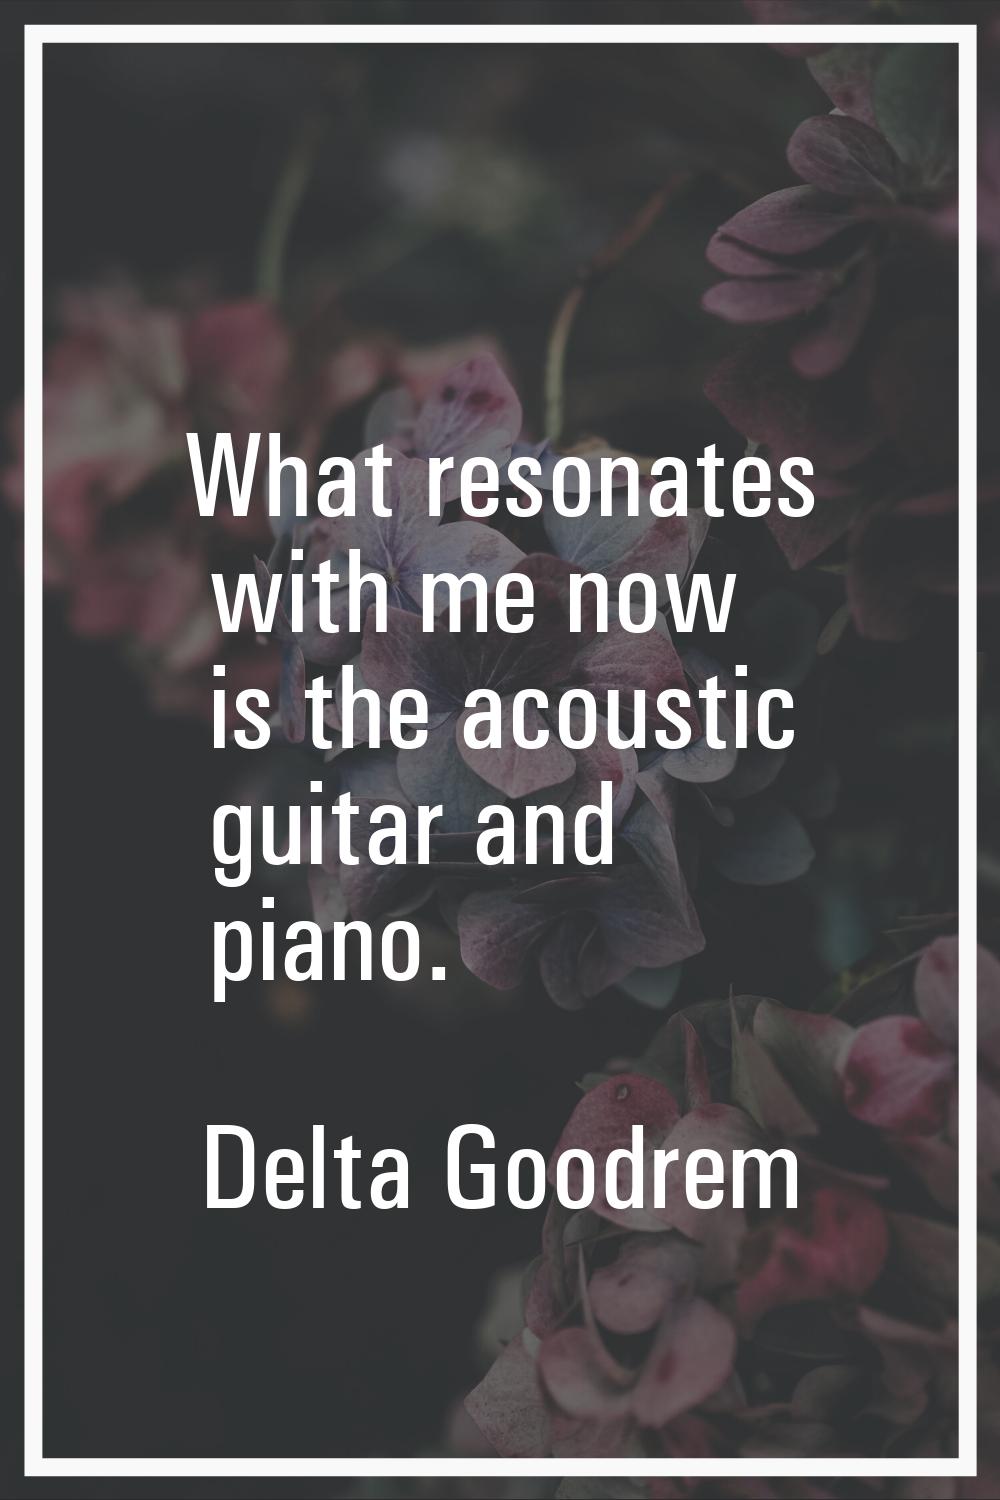 What resonates with me now is the acoustic guitar and piano.